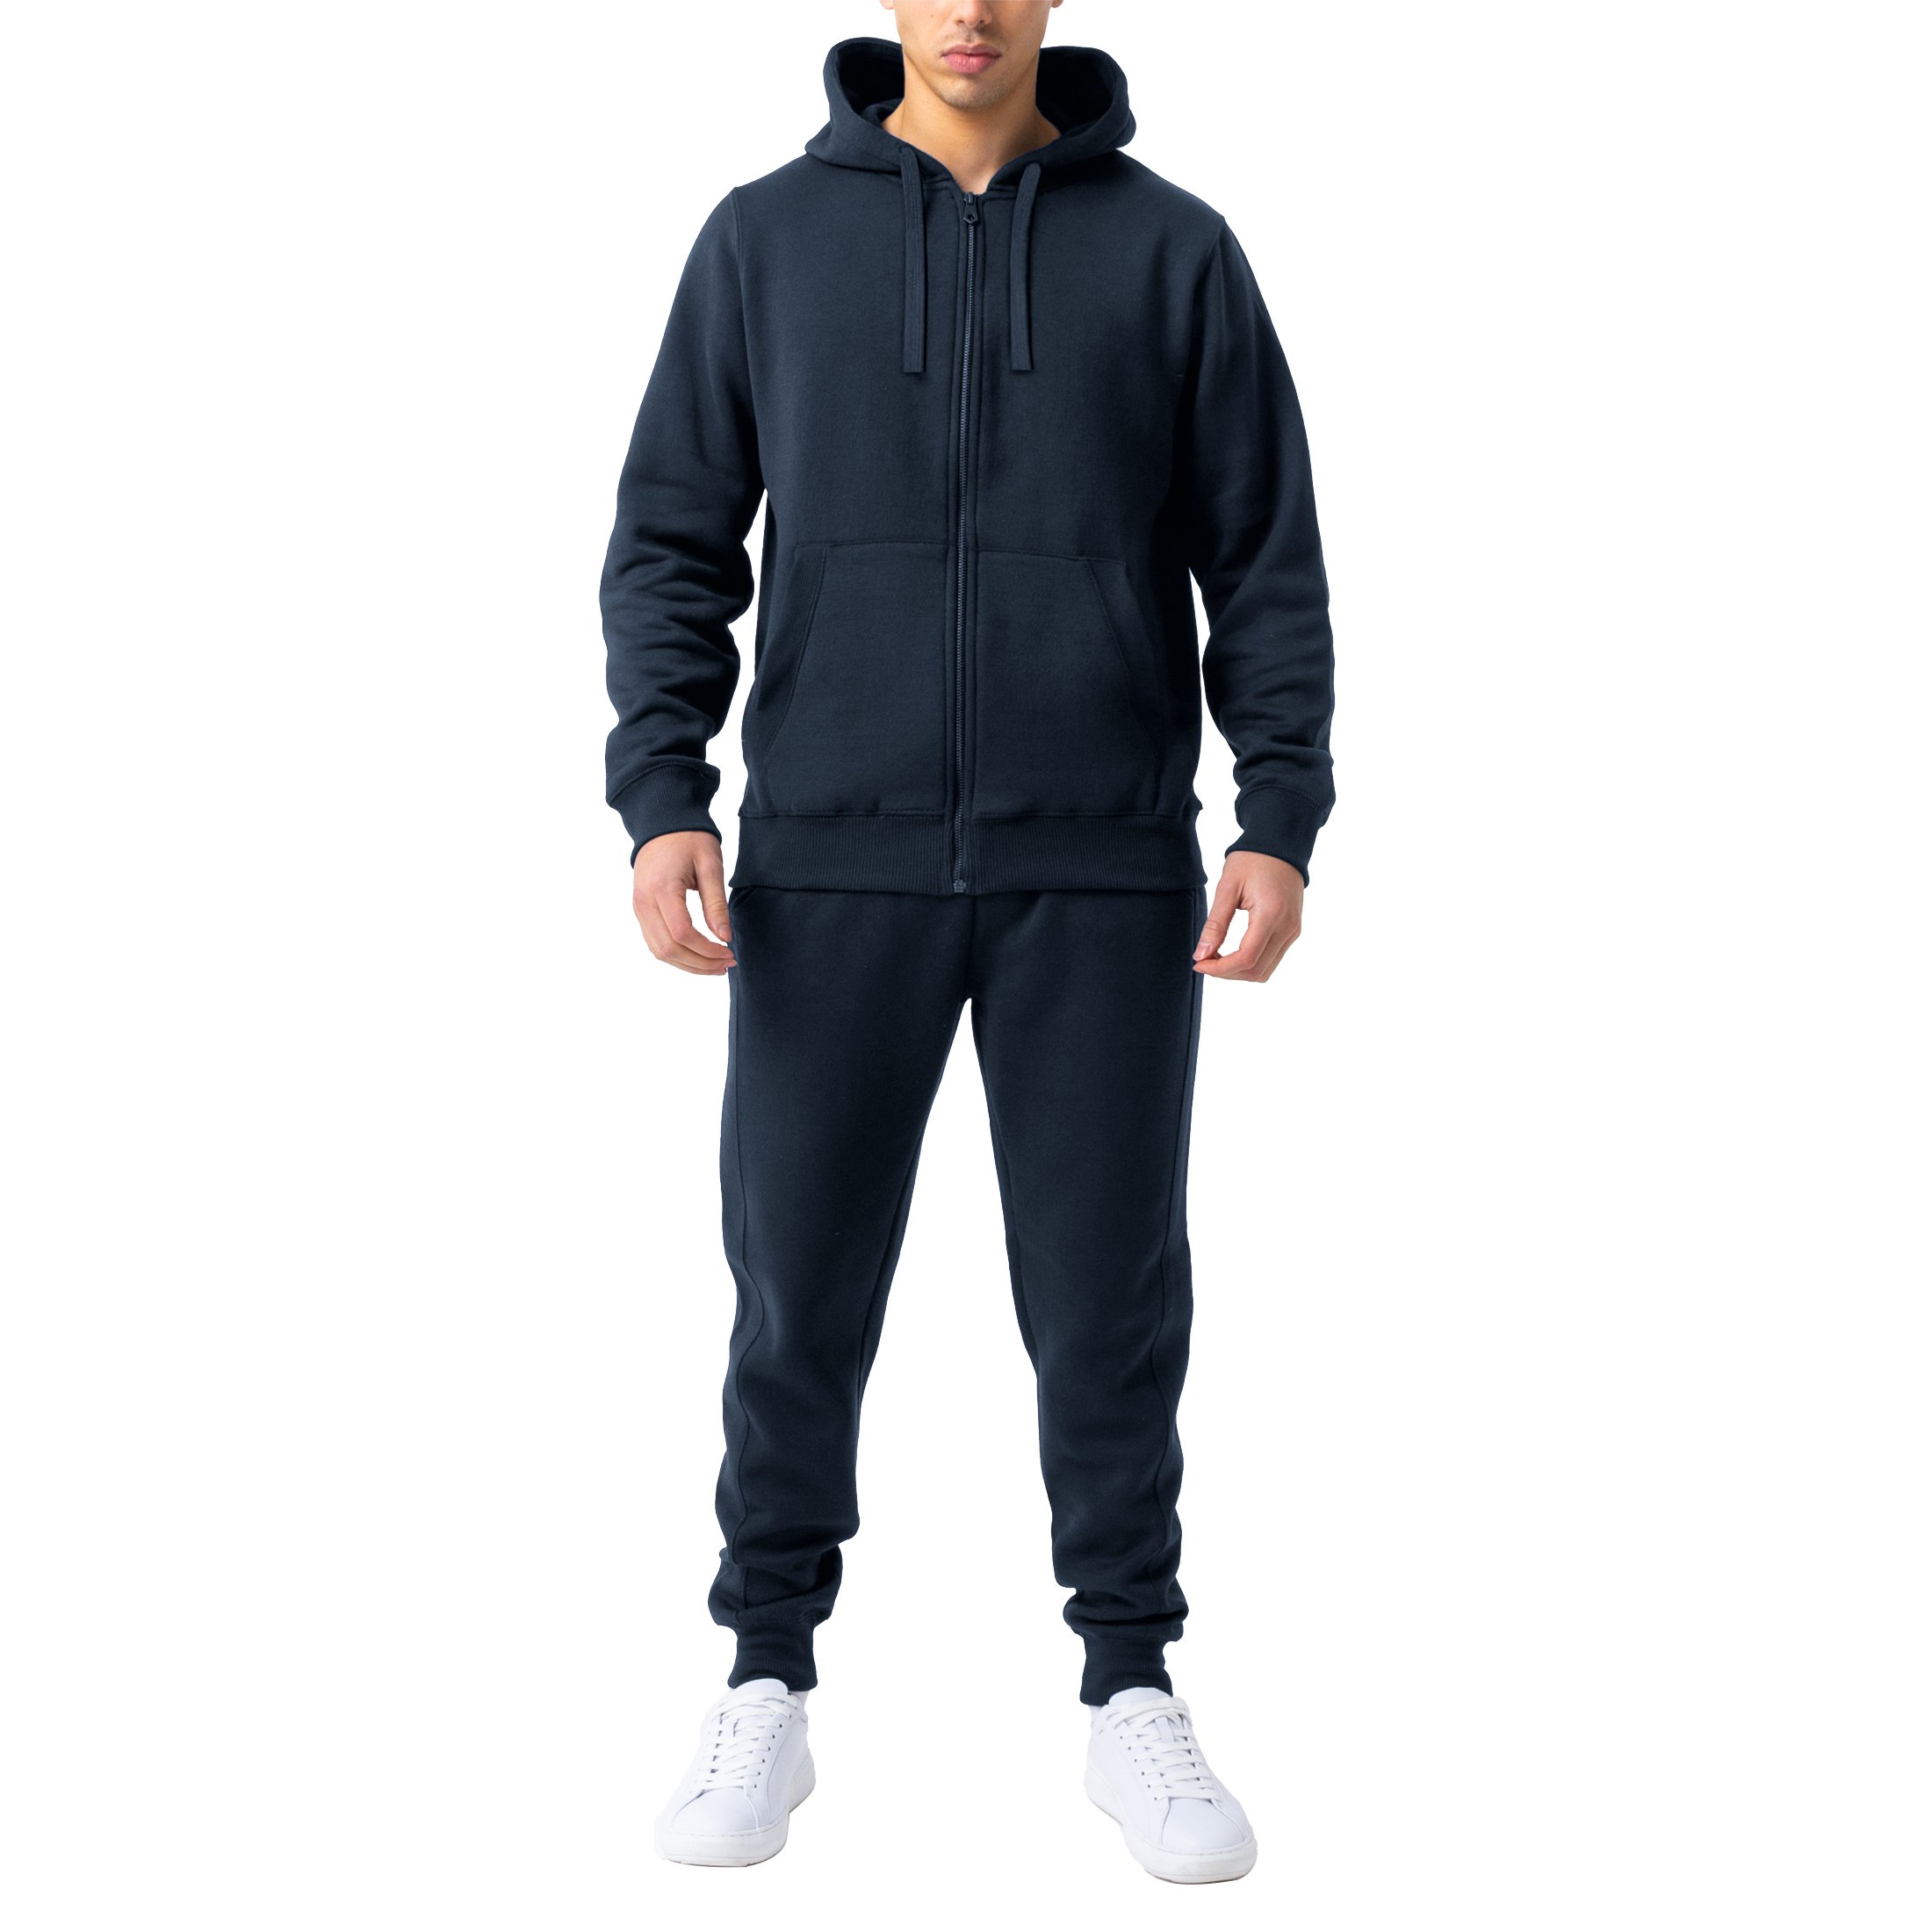 Men's Casual Jogging Athletic Active Full Zip Up Tracksuit - Navy, Small